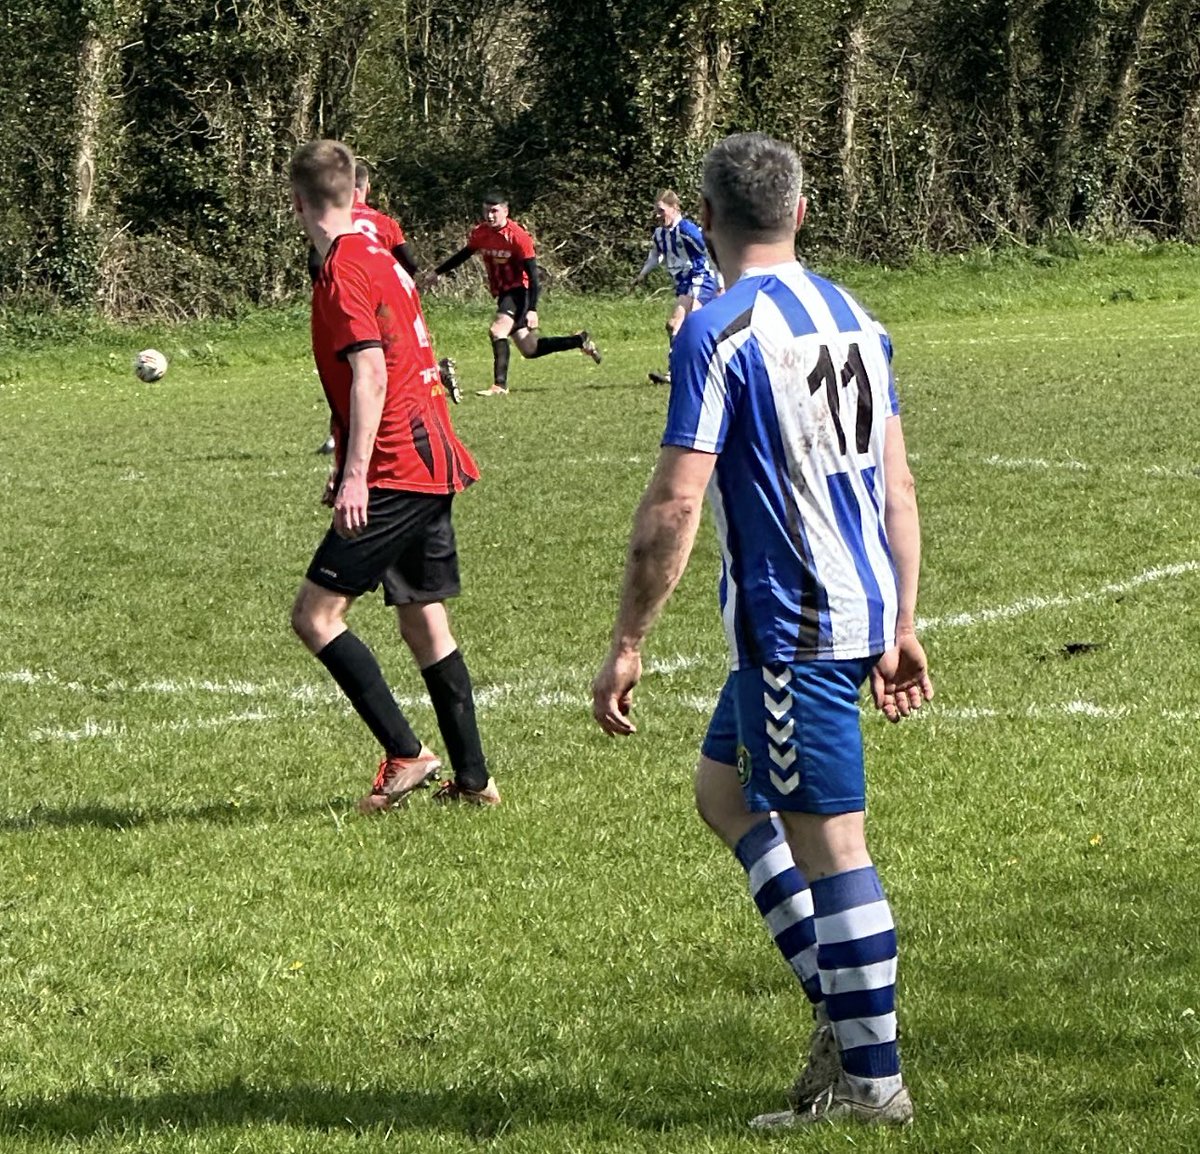 Ronan Tuohy’s 32nd minute goal is the difference by half-time as Bridge United lead hosts Kilkishen Celtic by 1-0 in the Clare Cup Quarter-Final